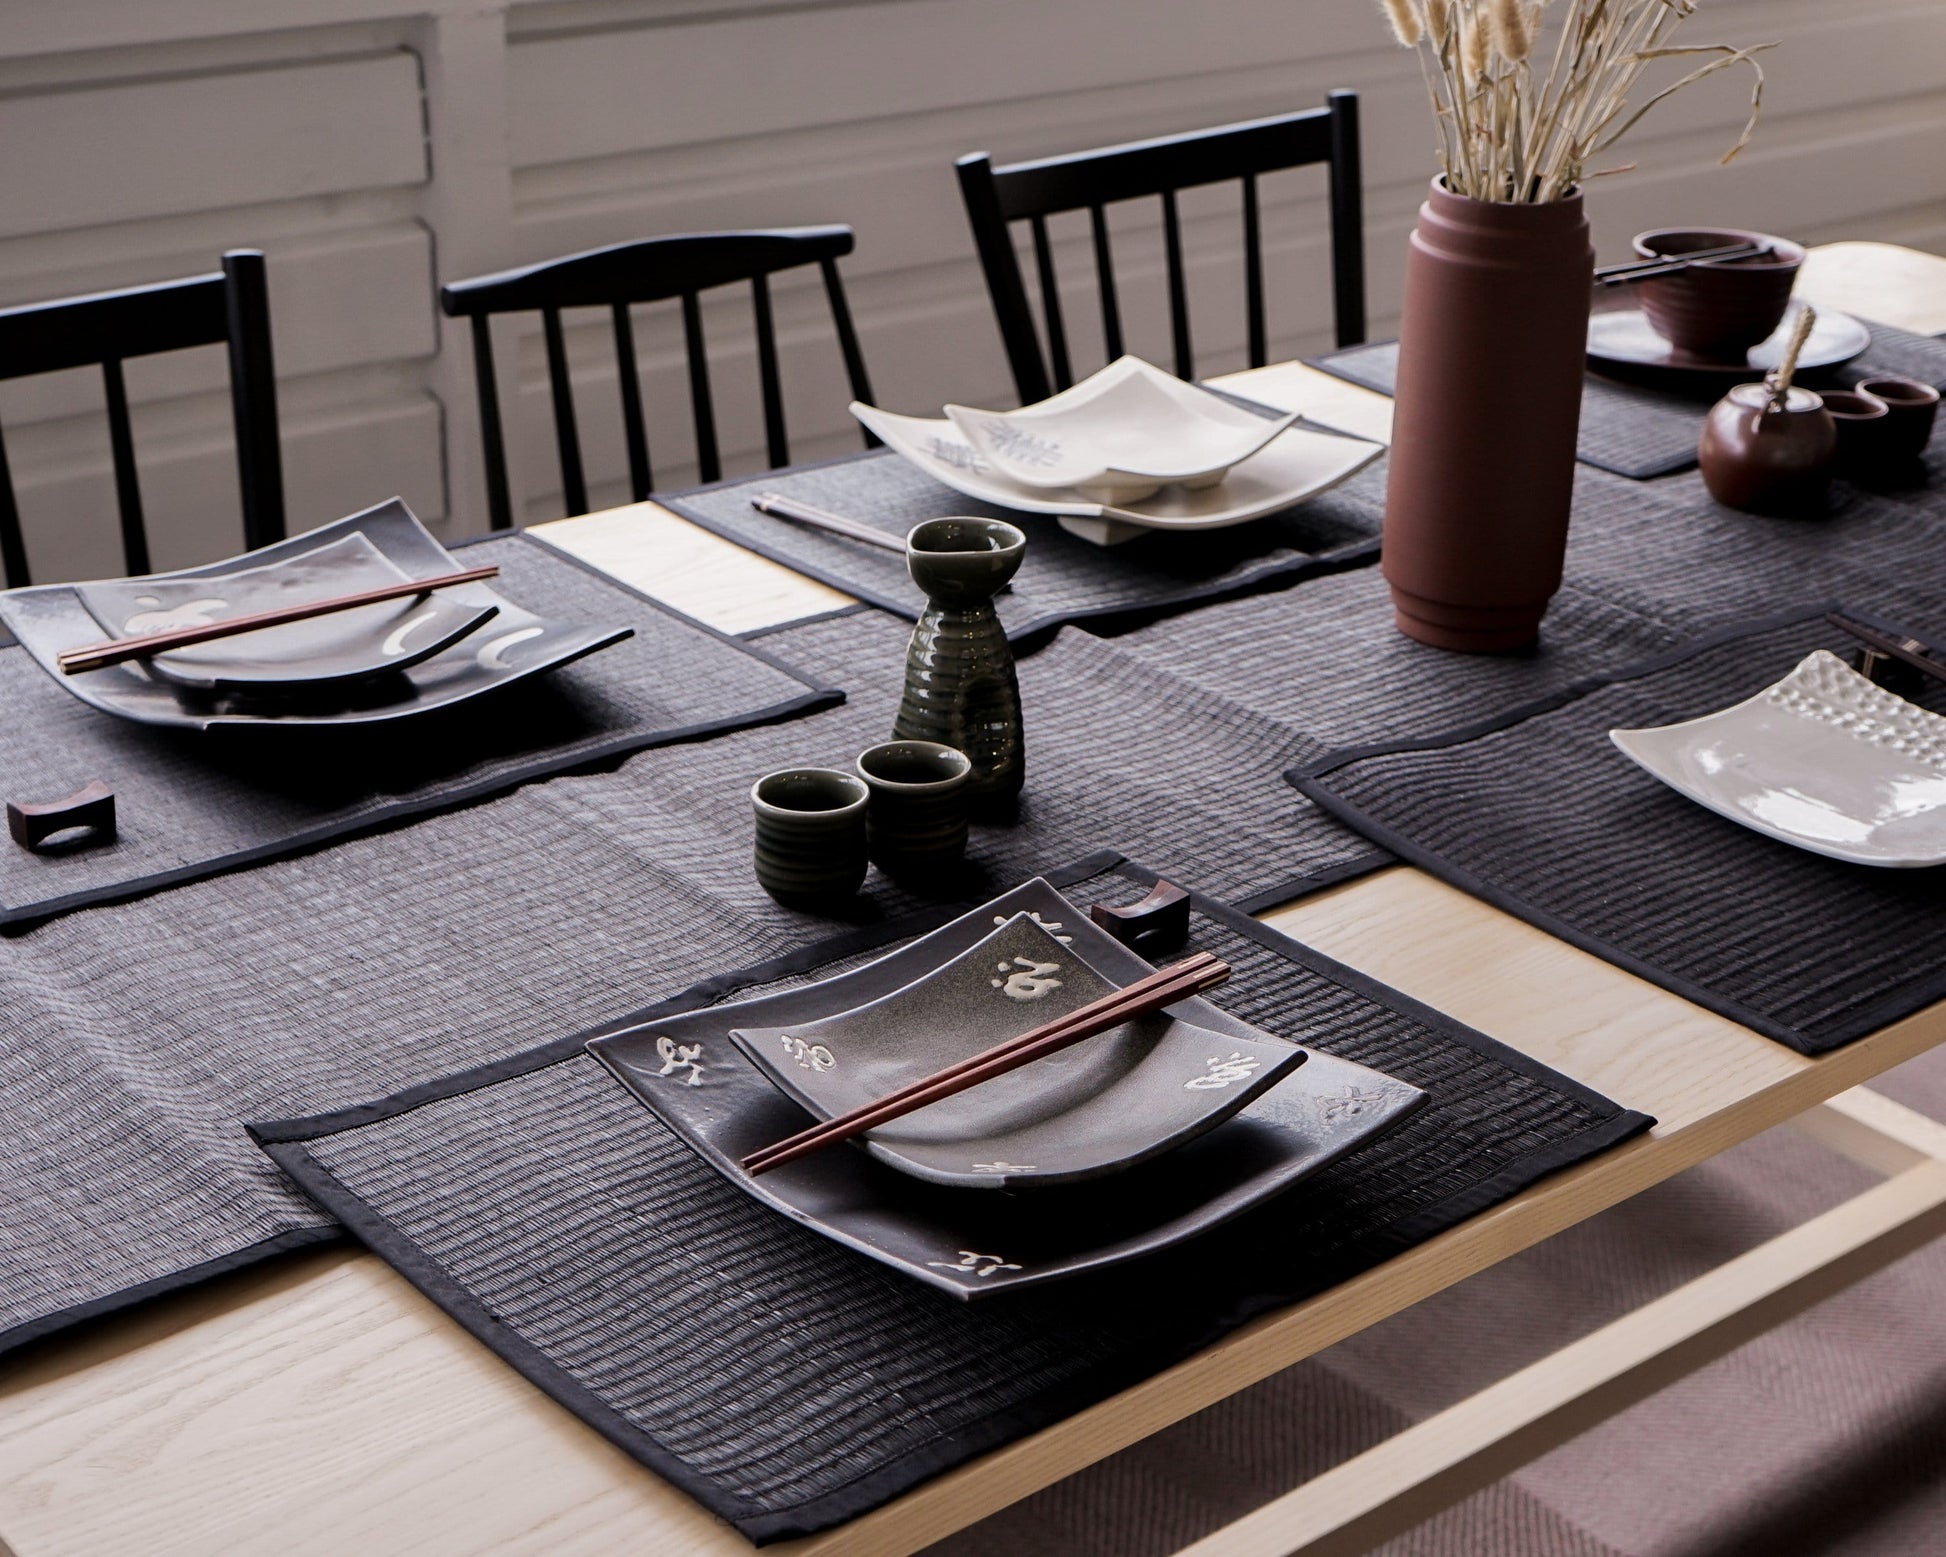 Black Reed Placemats - ShopGreenToday